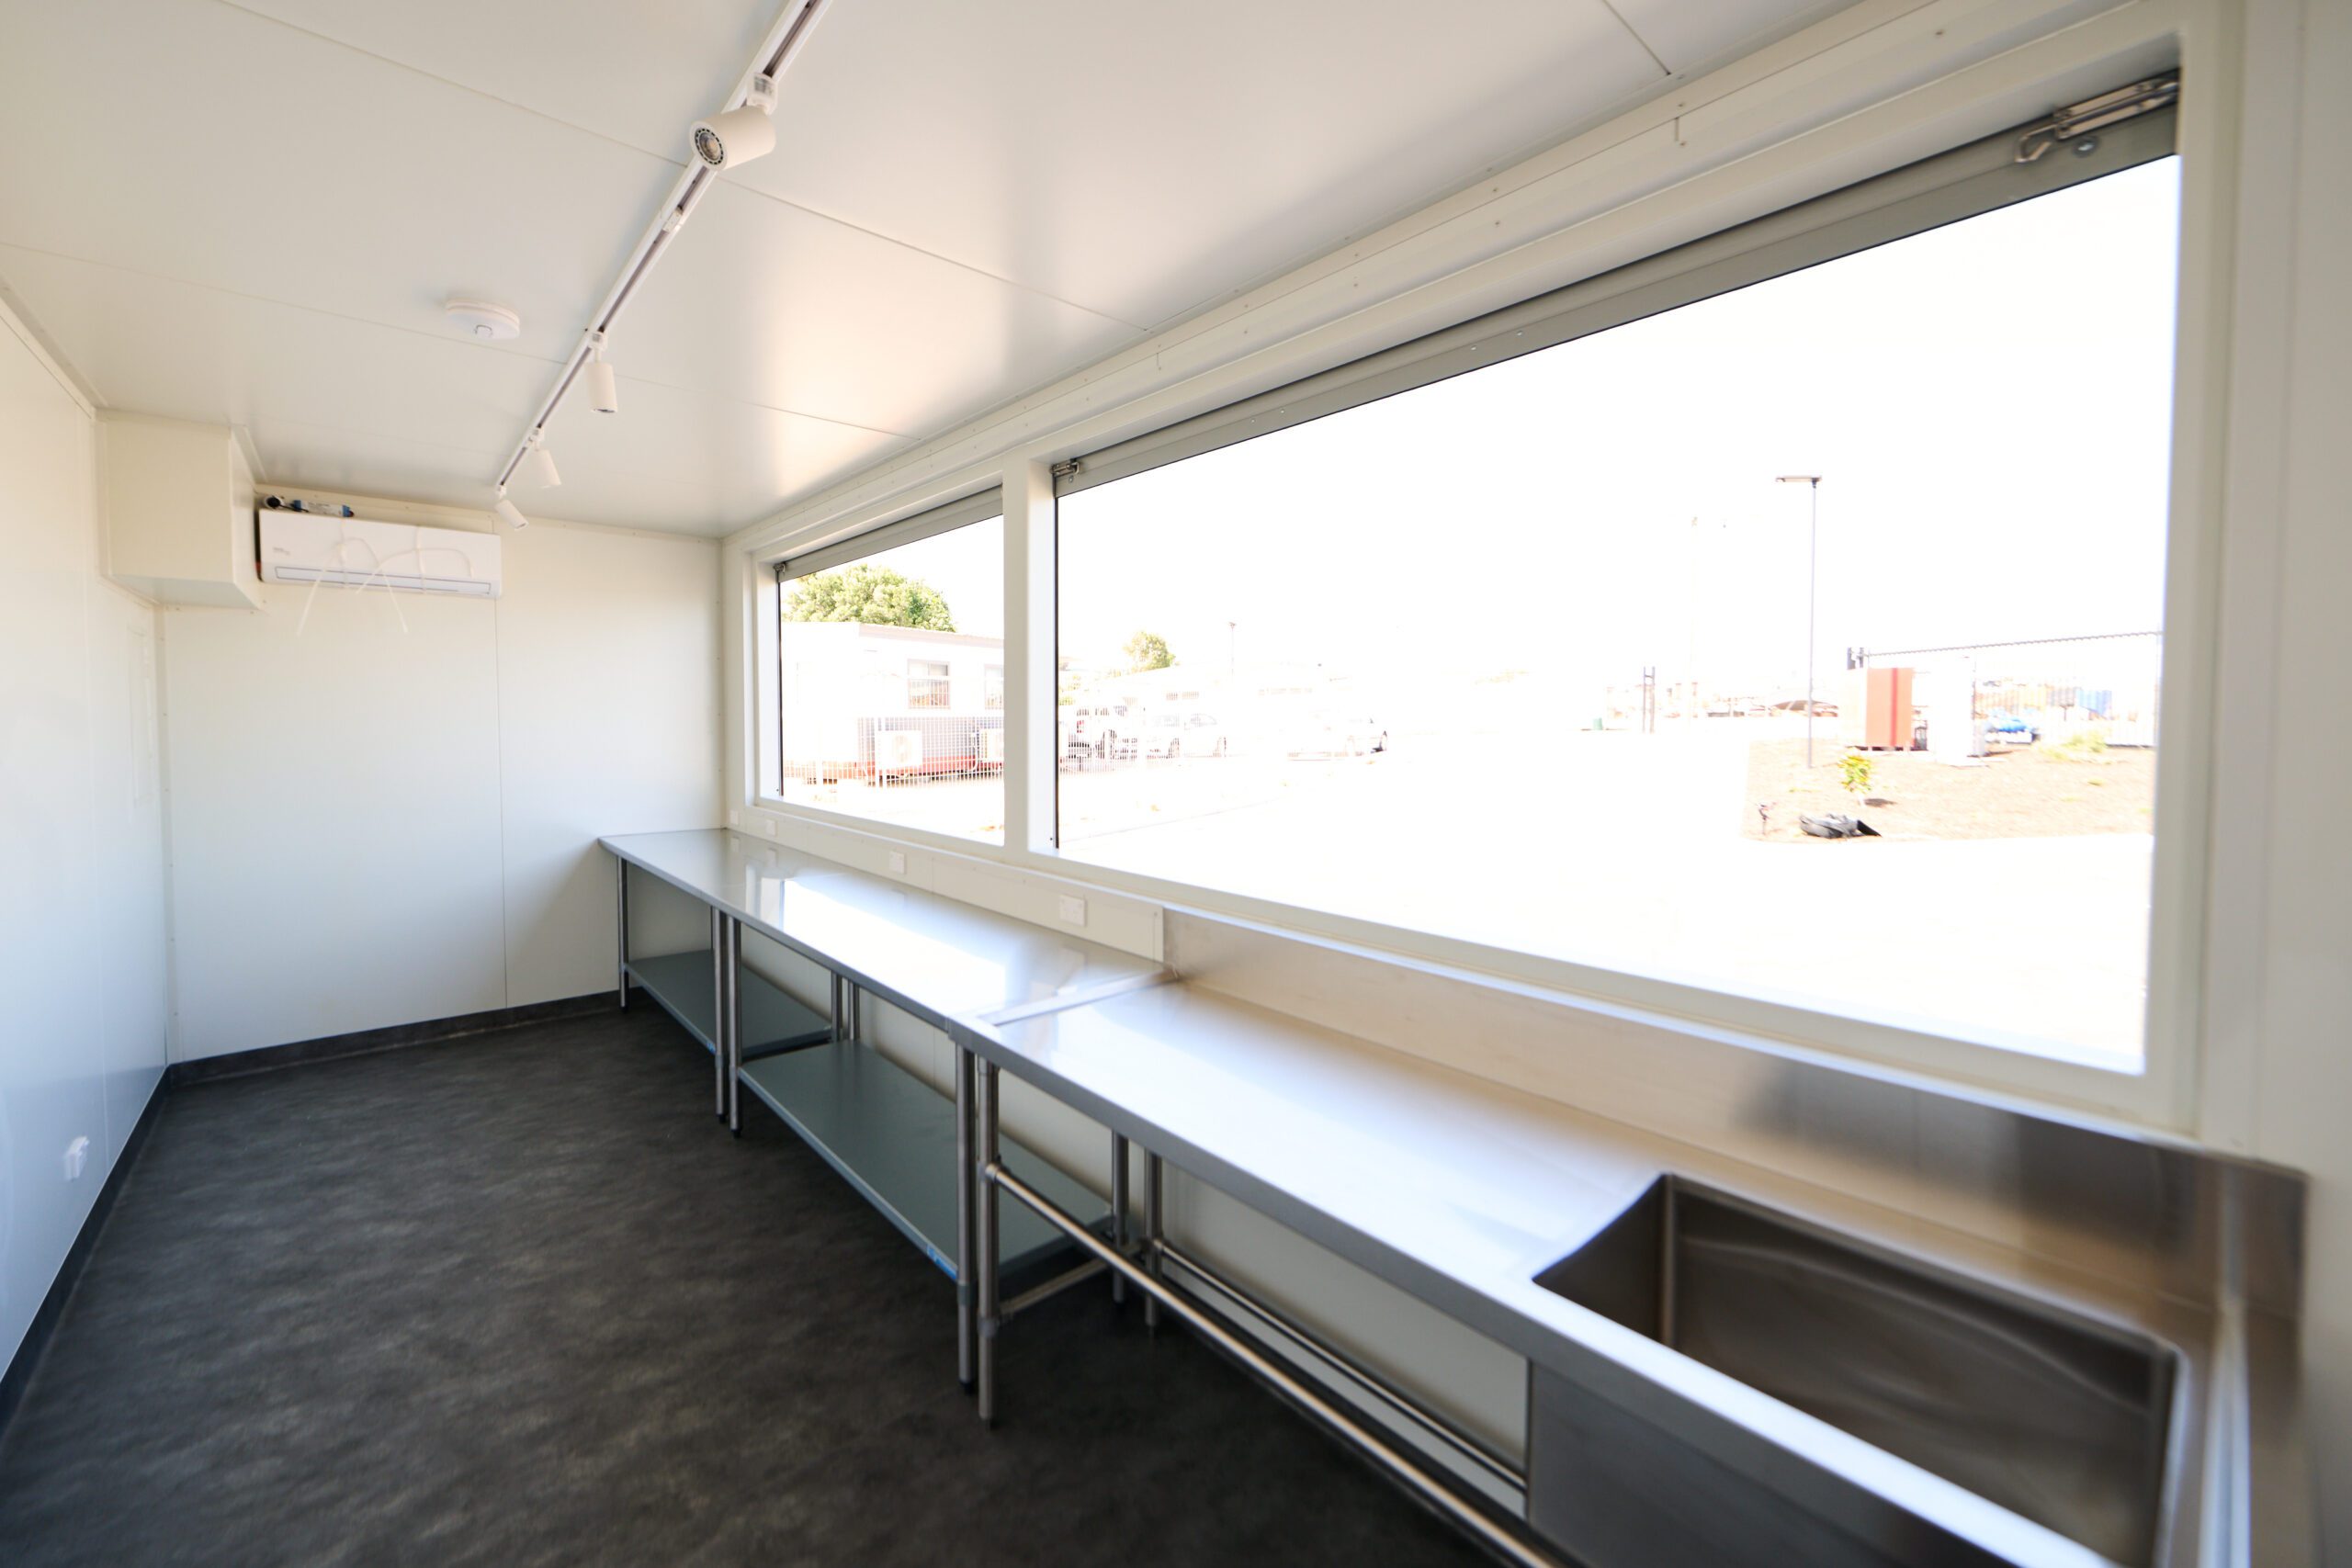 Interior of a Shipping Container Bars with stainless steel countertop and large window